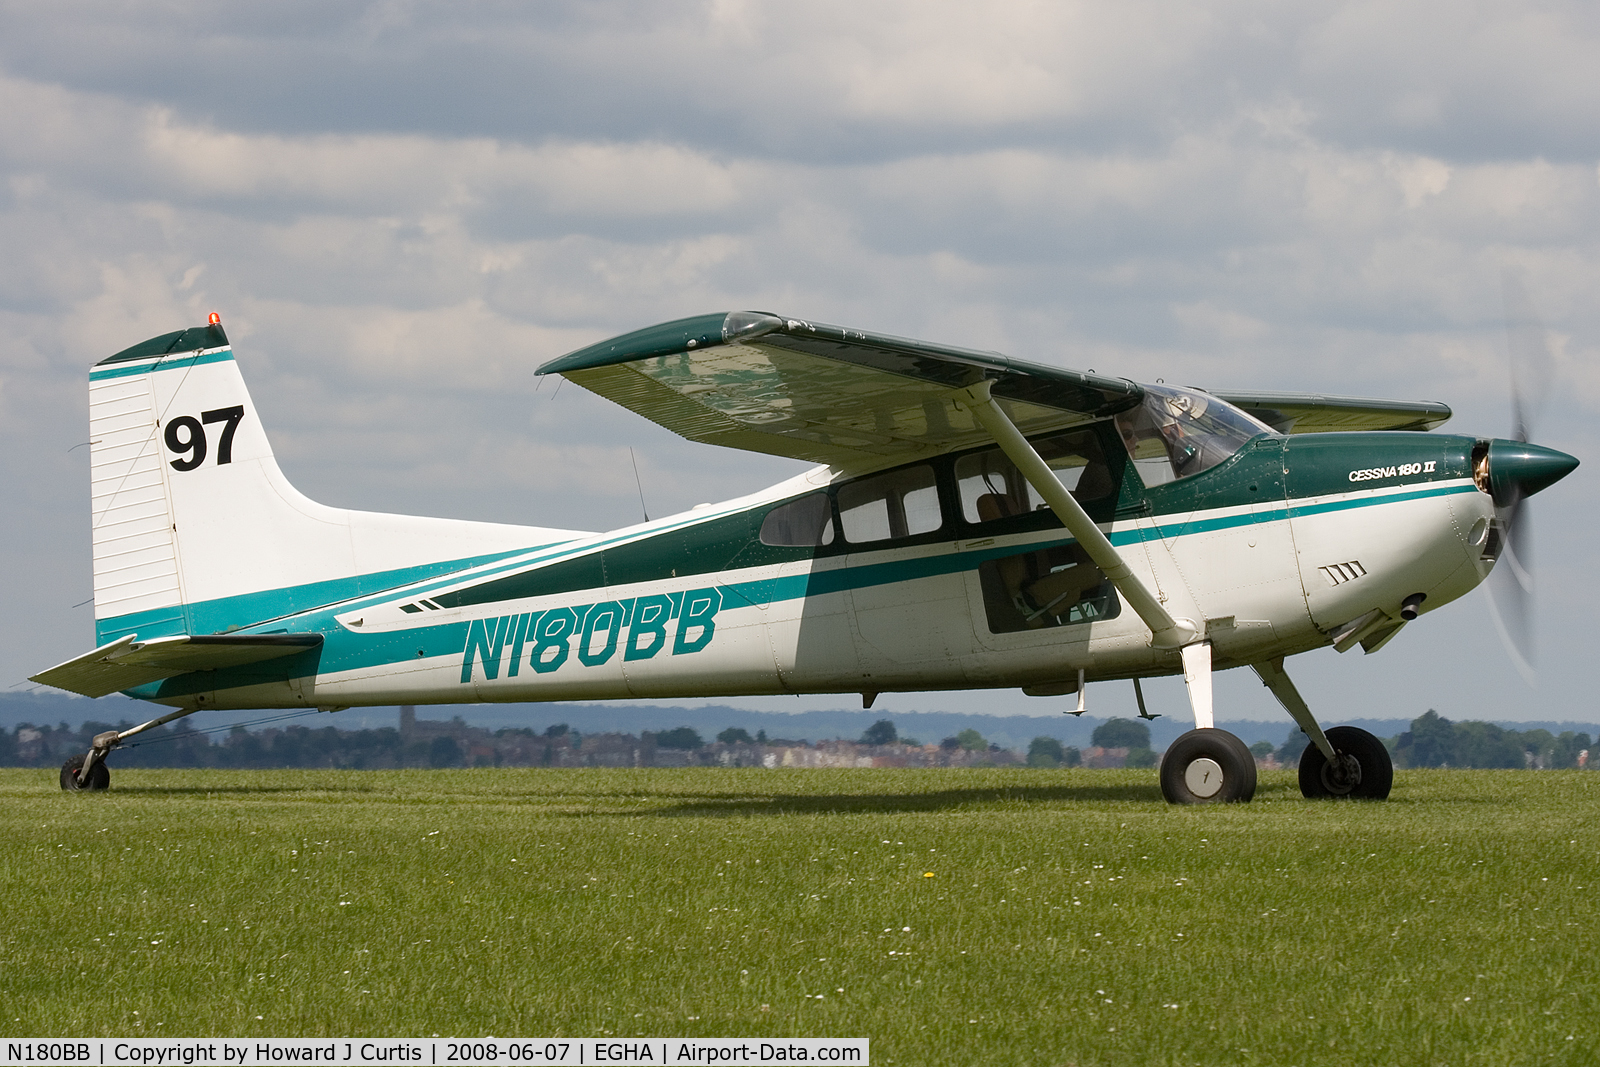 N180BB, 1979 Cessna 180K Skywagon C/N 18053103, Privately owned. Coded 97, at the Dorset Air Races.